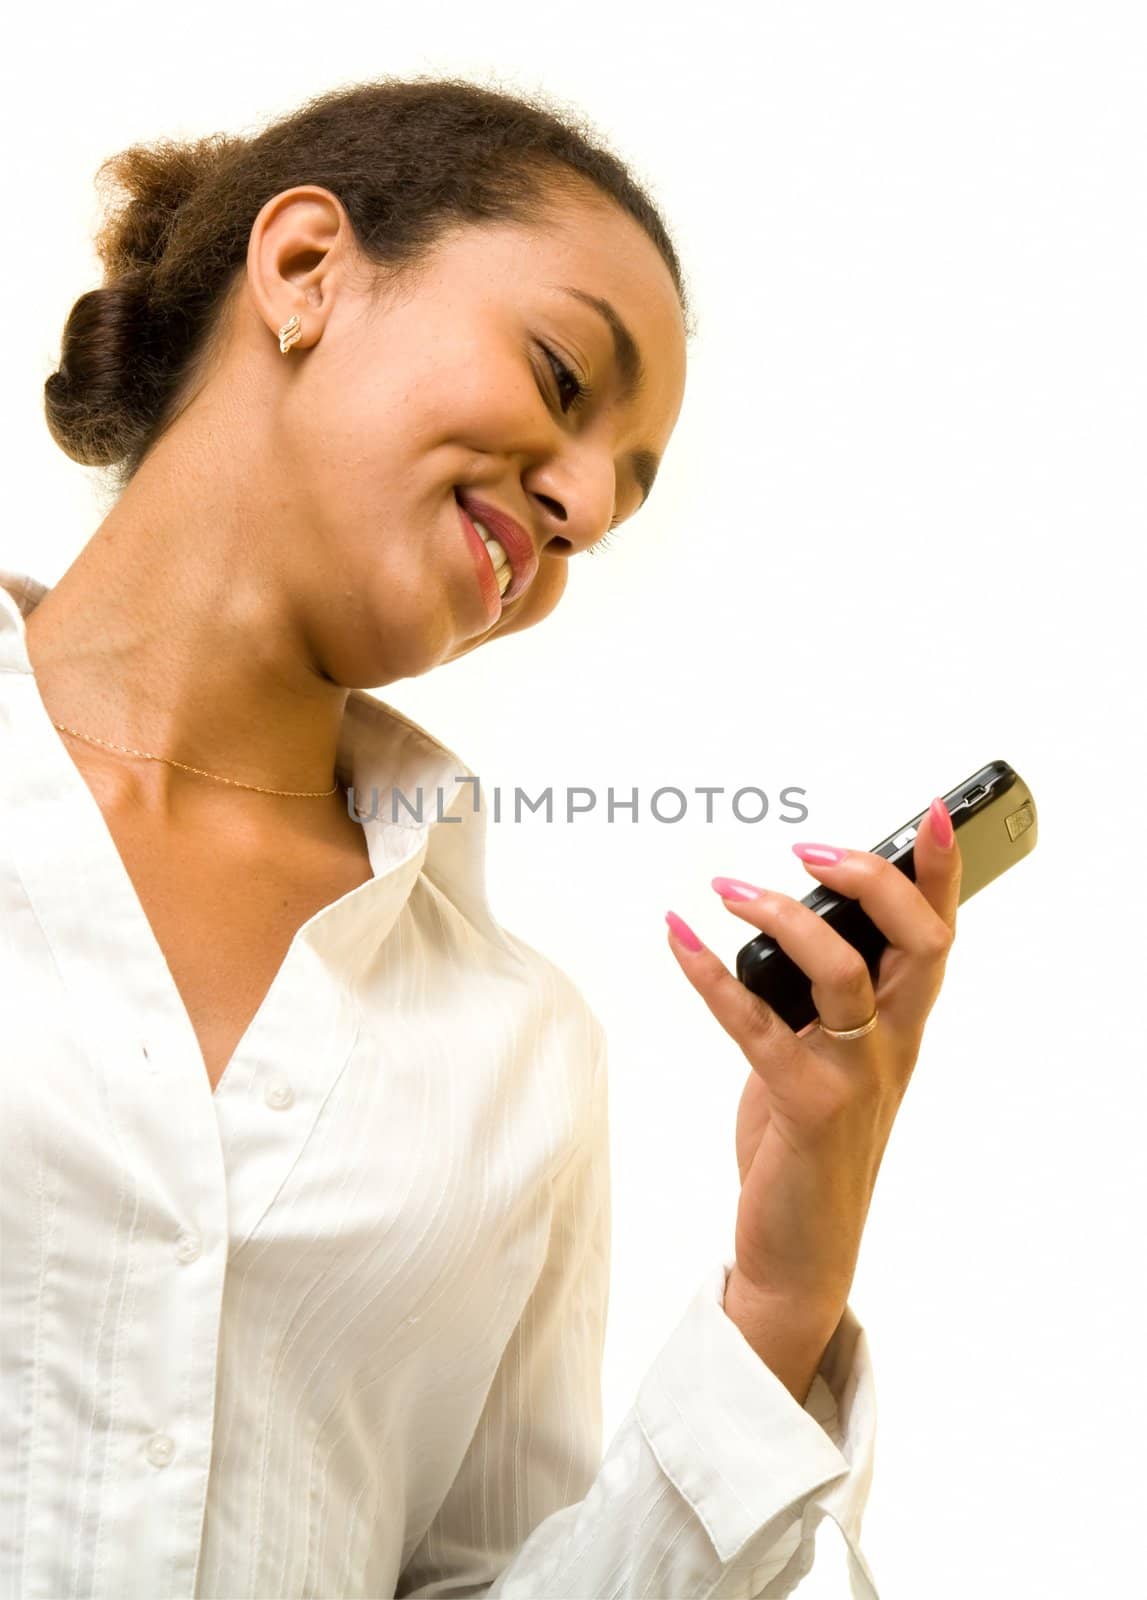 smiling woman with mobile phone on a white background